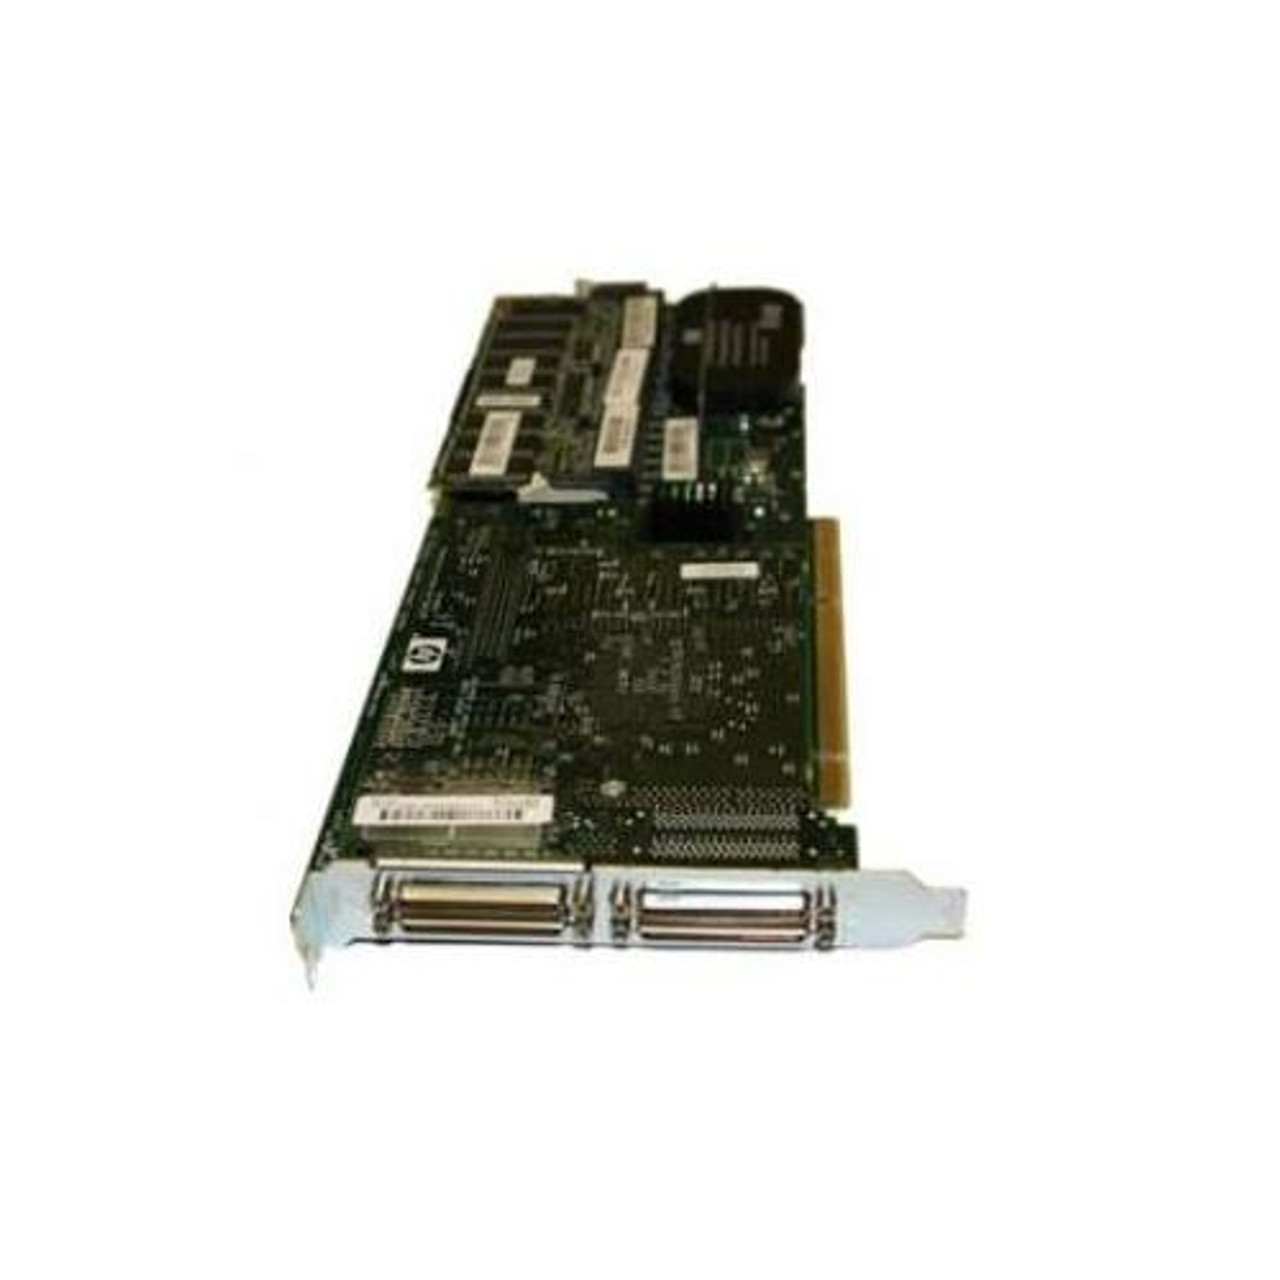 273914-B21 HP Smart Array 6404 256MB Cache 64-bit Ultra-320 SCSI 68-Pin  4-channel PCI-X 0/1/5/10 RAID Controller Card for ProLiant ML570 and DL580  G3